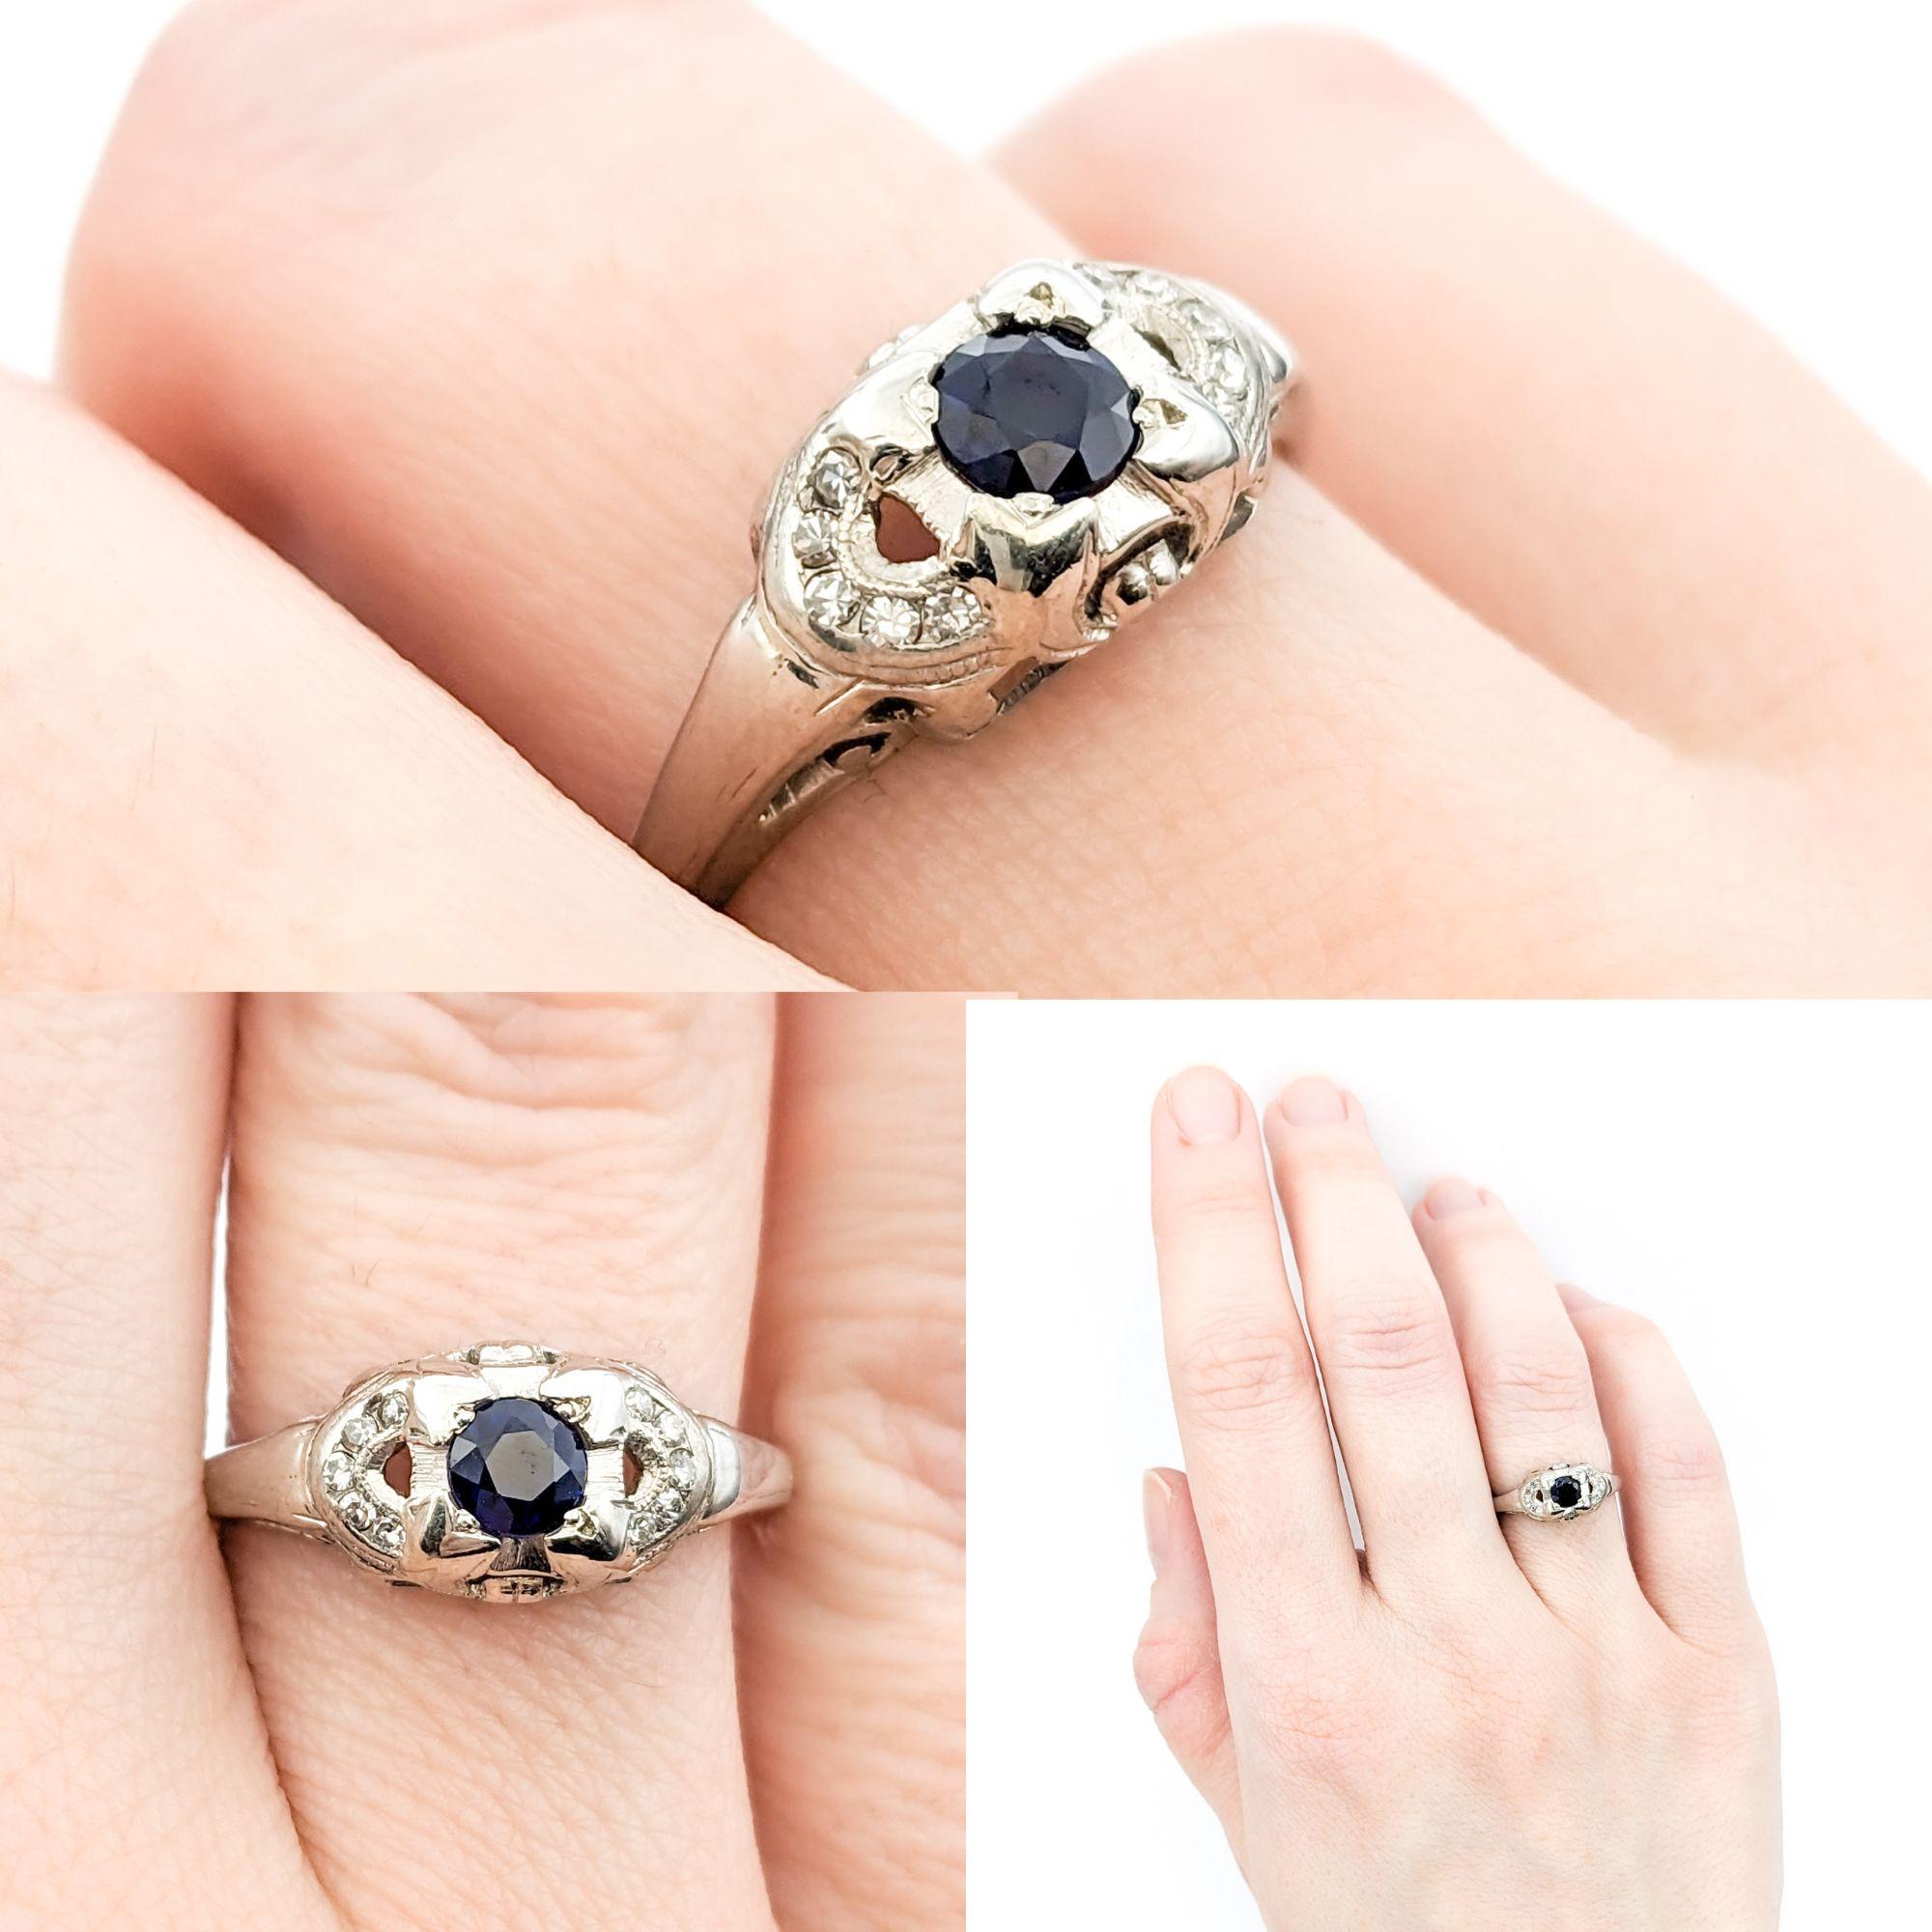 Vintage Blue Sapphire & Diamond Ring In White Gold

Embrace the timeless elegance of this Vintage Ring, expertly crafted in 14kt White Gold. Featuring a .14ctw Round Diamond centerpiece complemented by a .19ct Blue Sapphire, this ring epitomizes the